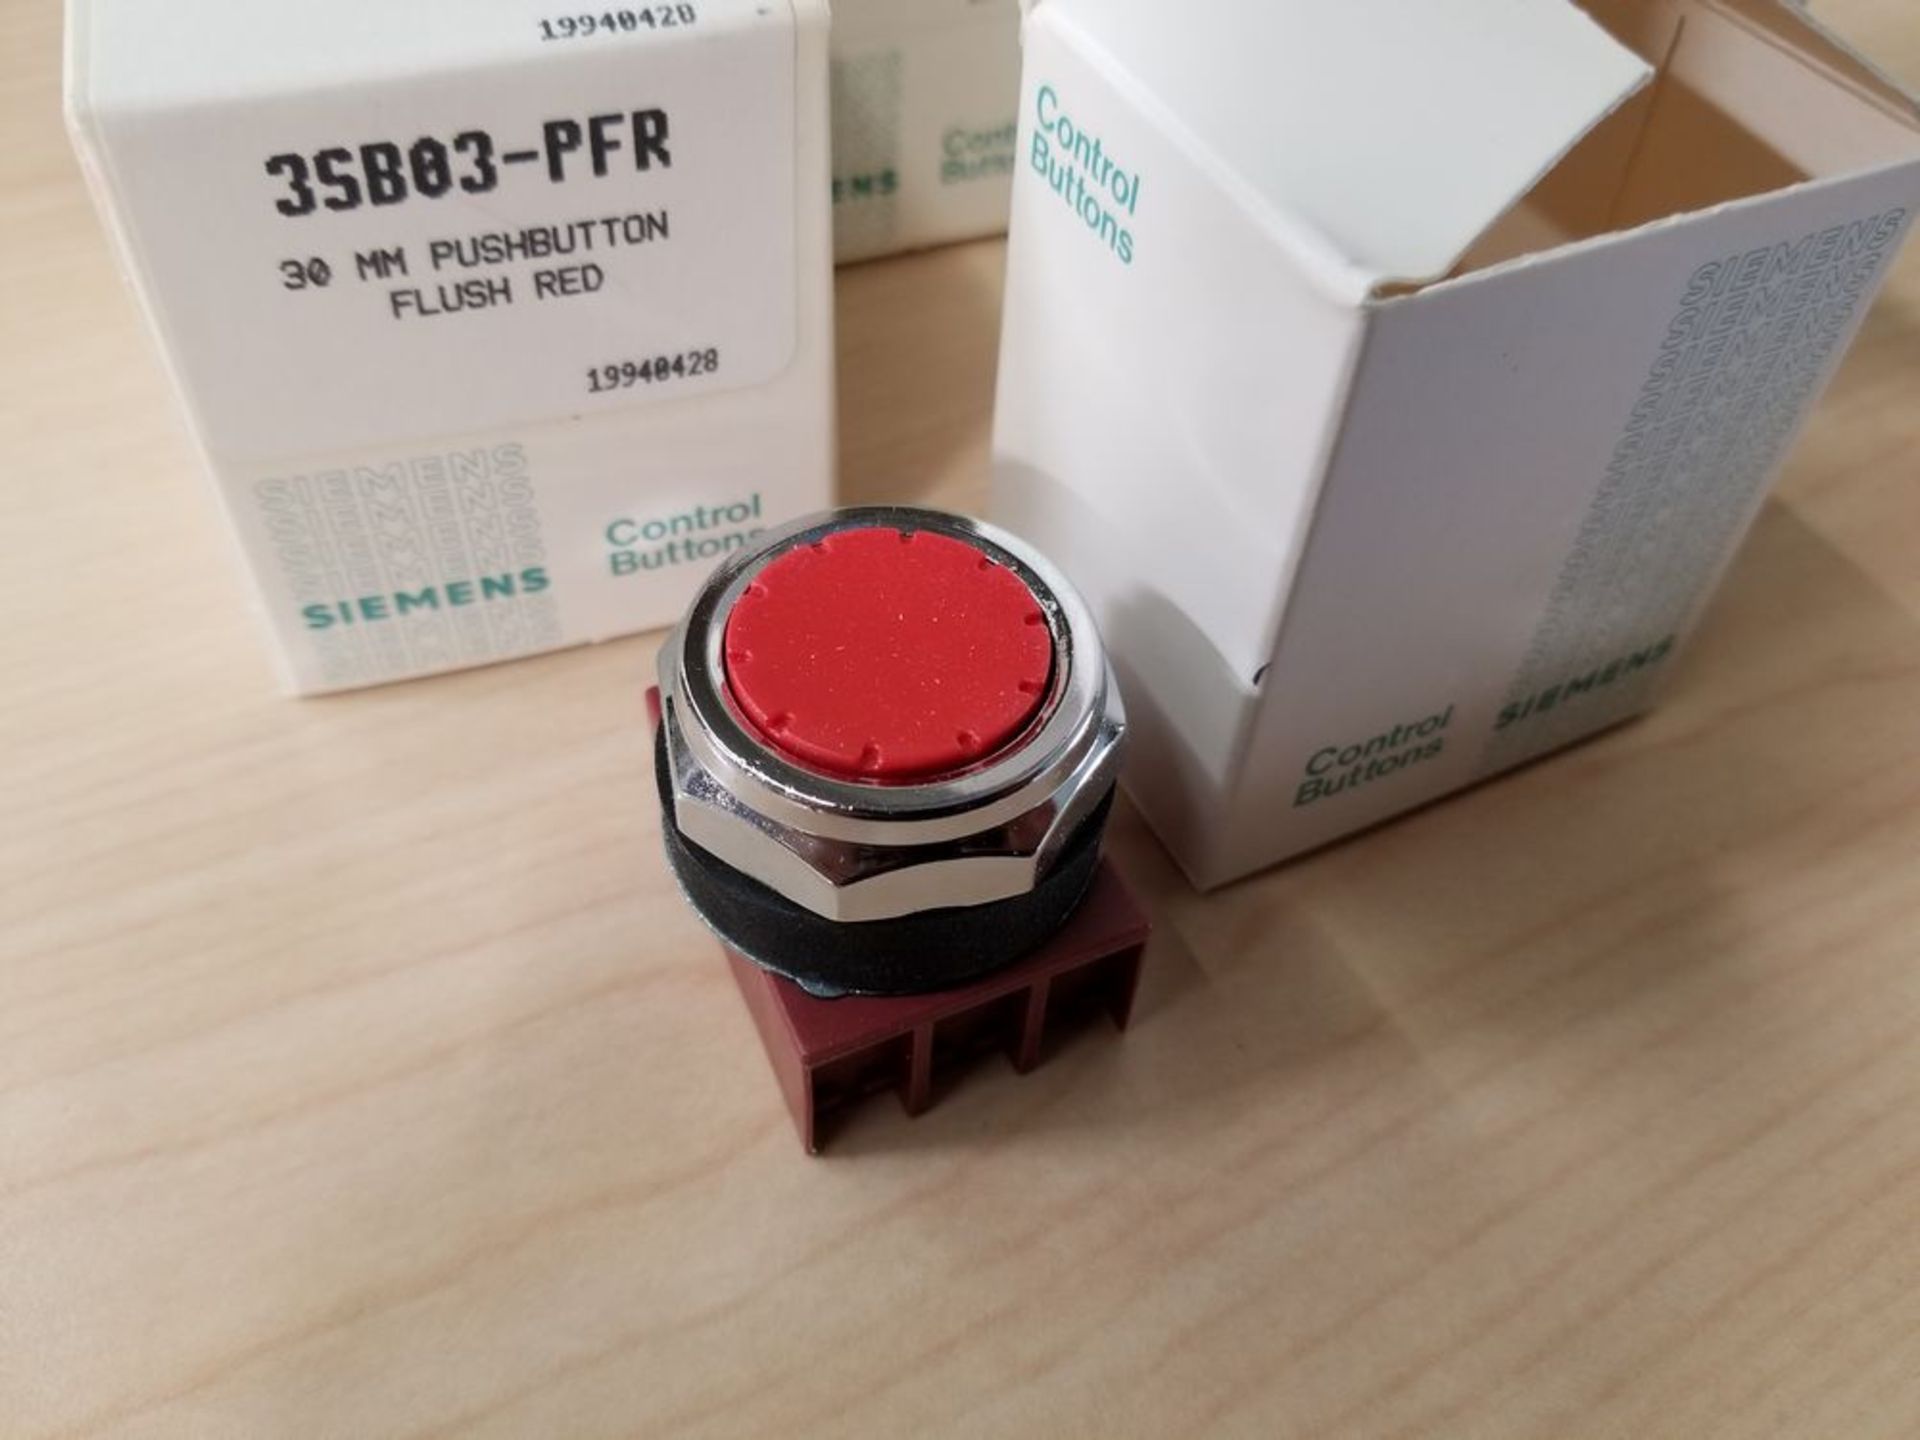 LOT OF 6 NEW SIEMENS 3SB03-PFR 30MM FLUSH RED PUSHBUTTON SWITCHES - Image 2 of 2